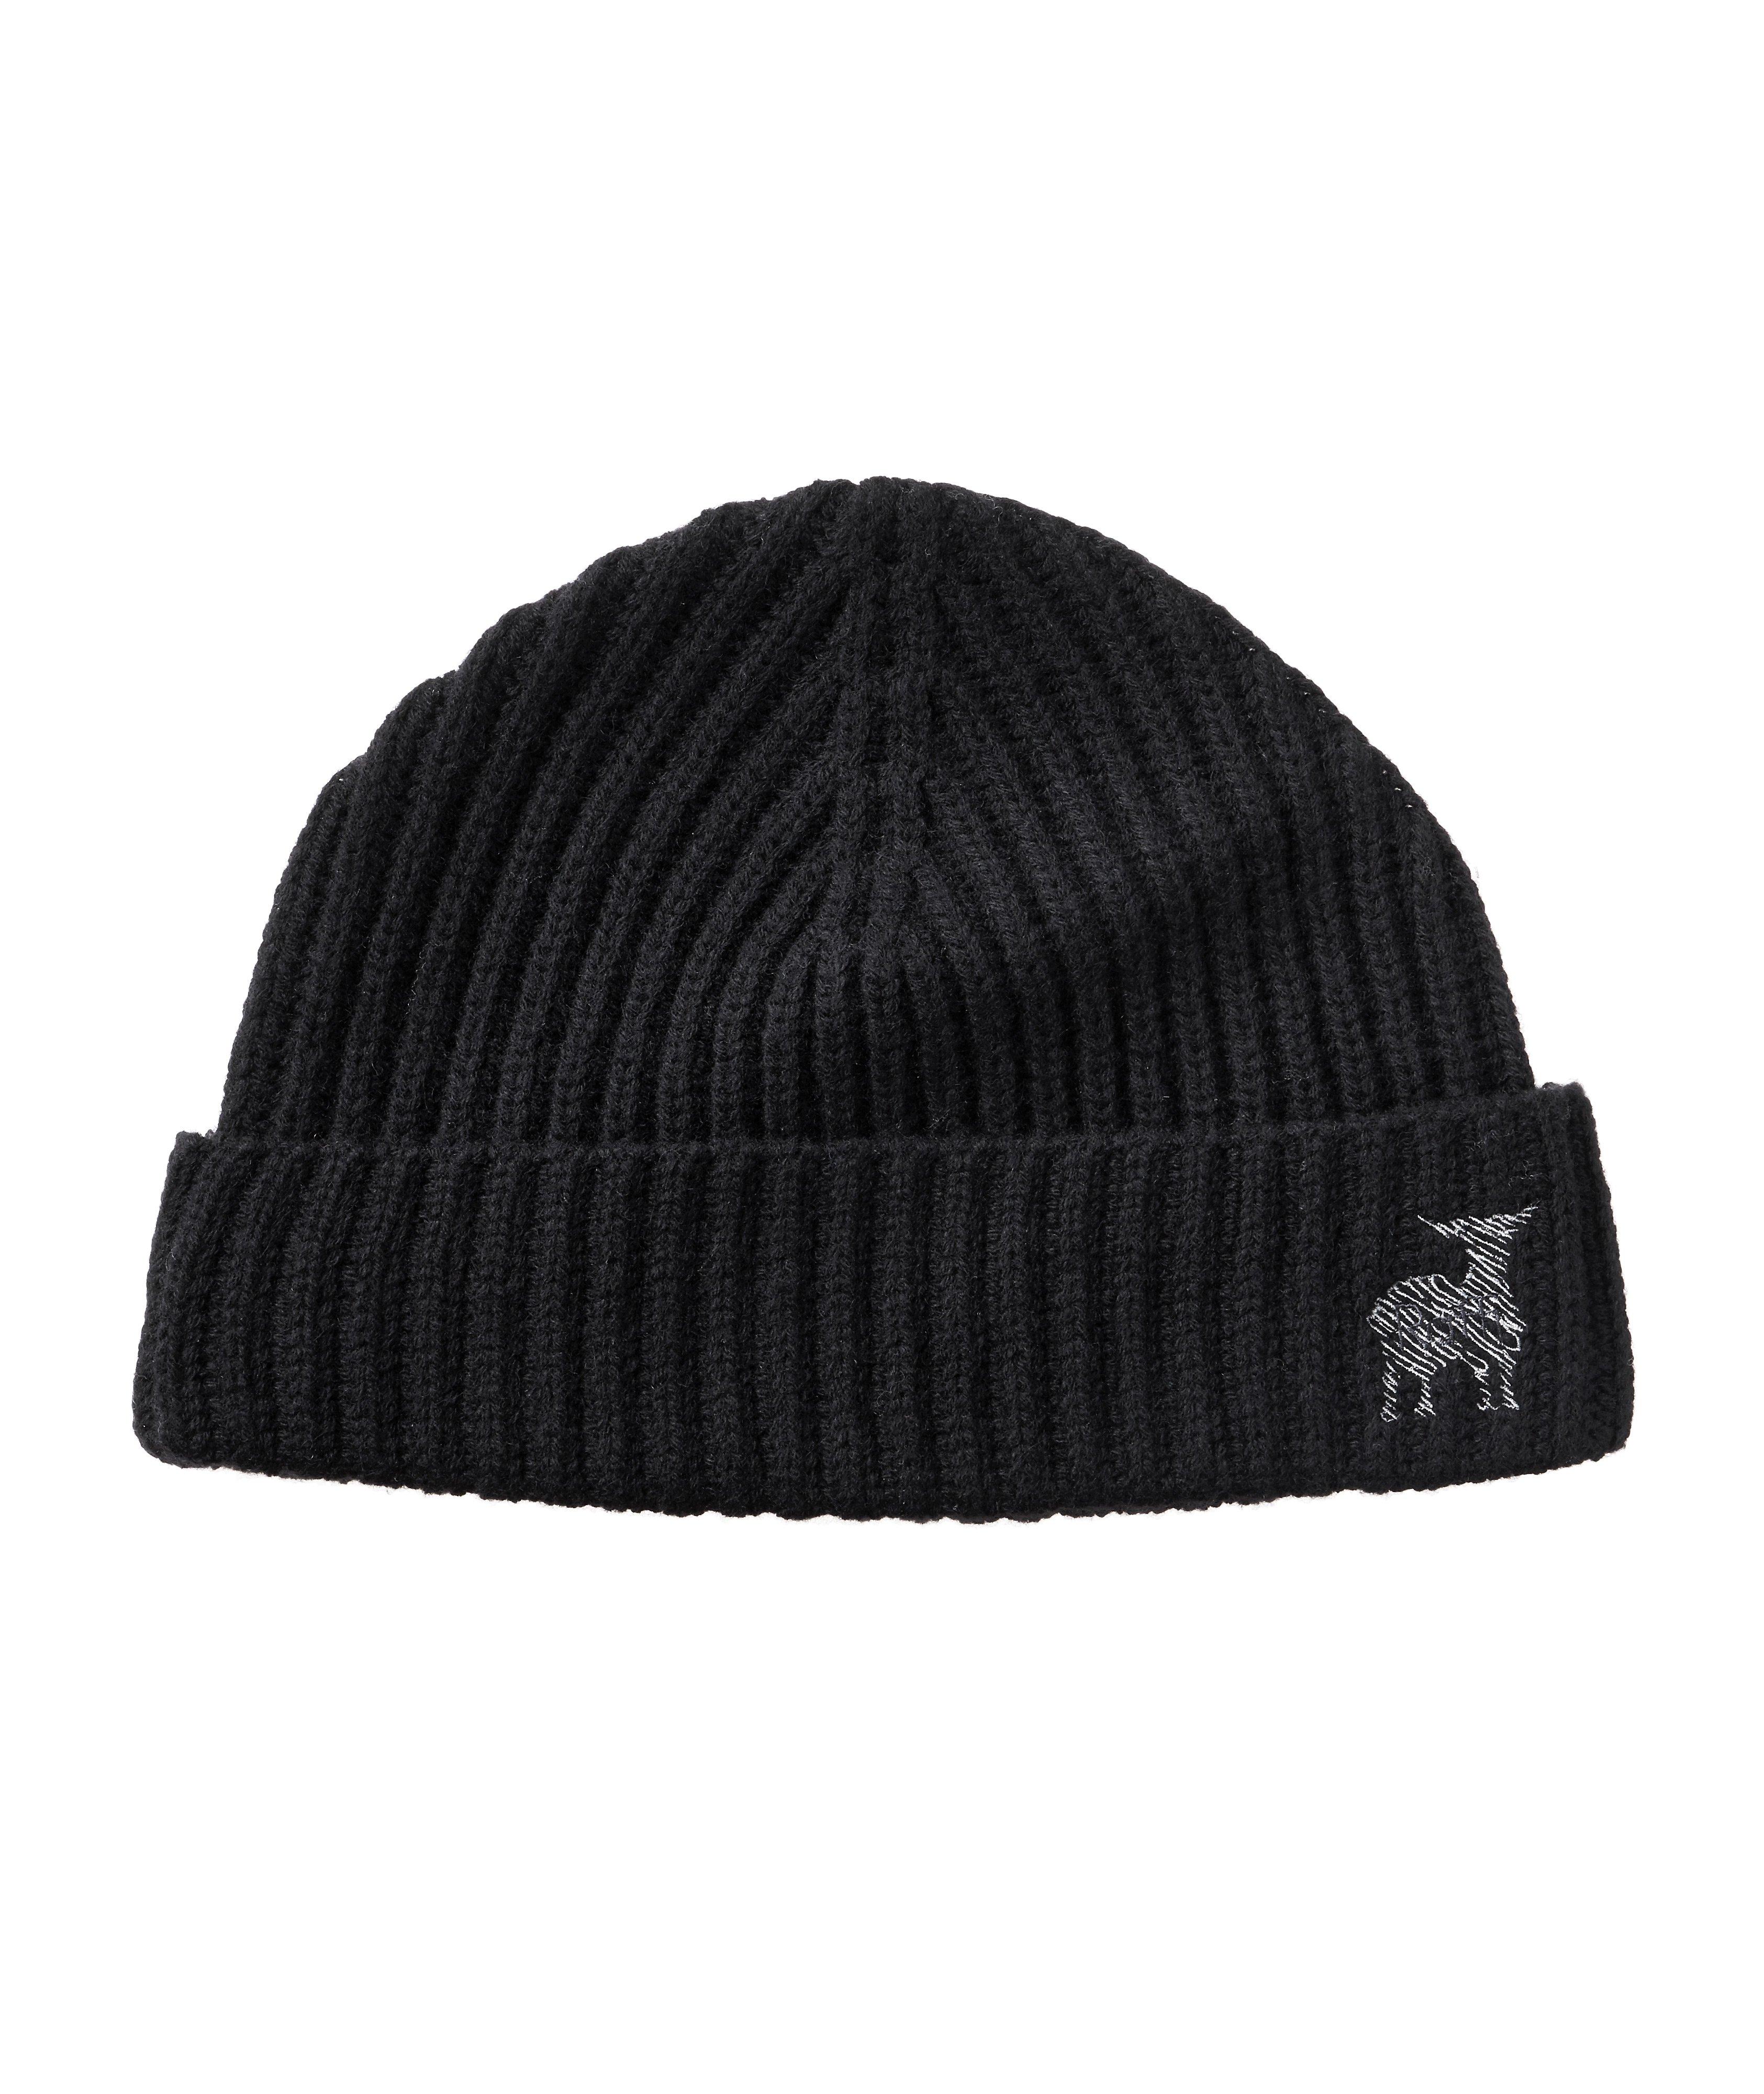 Ribbed Knit Wool-Cashmere Toque image 0